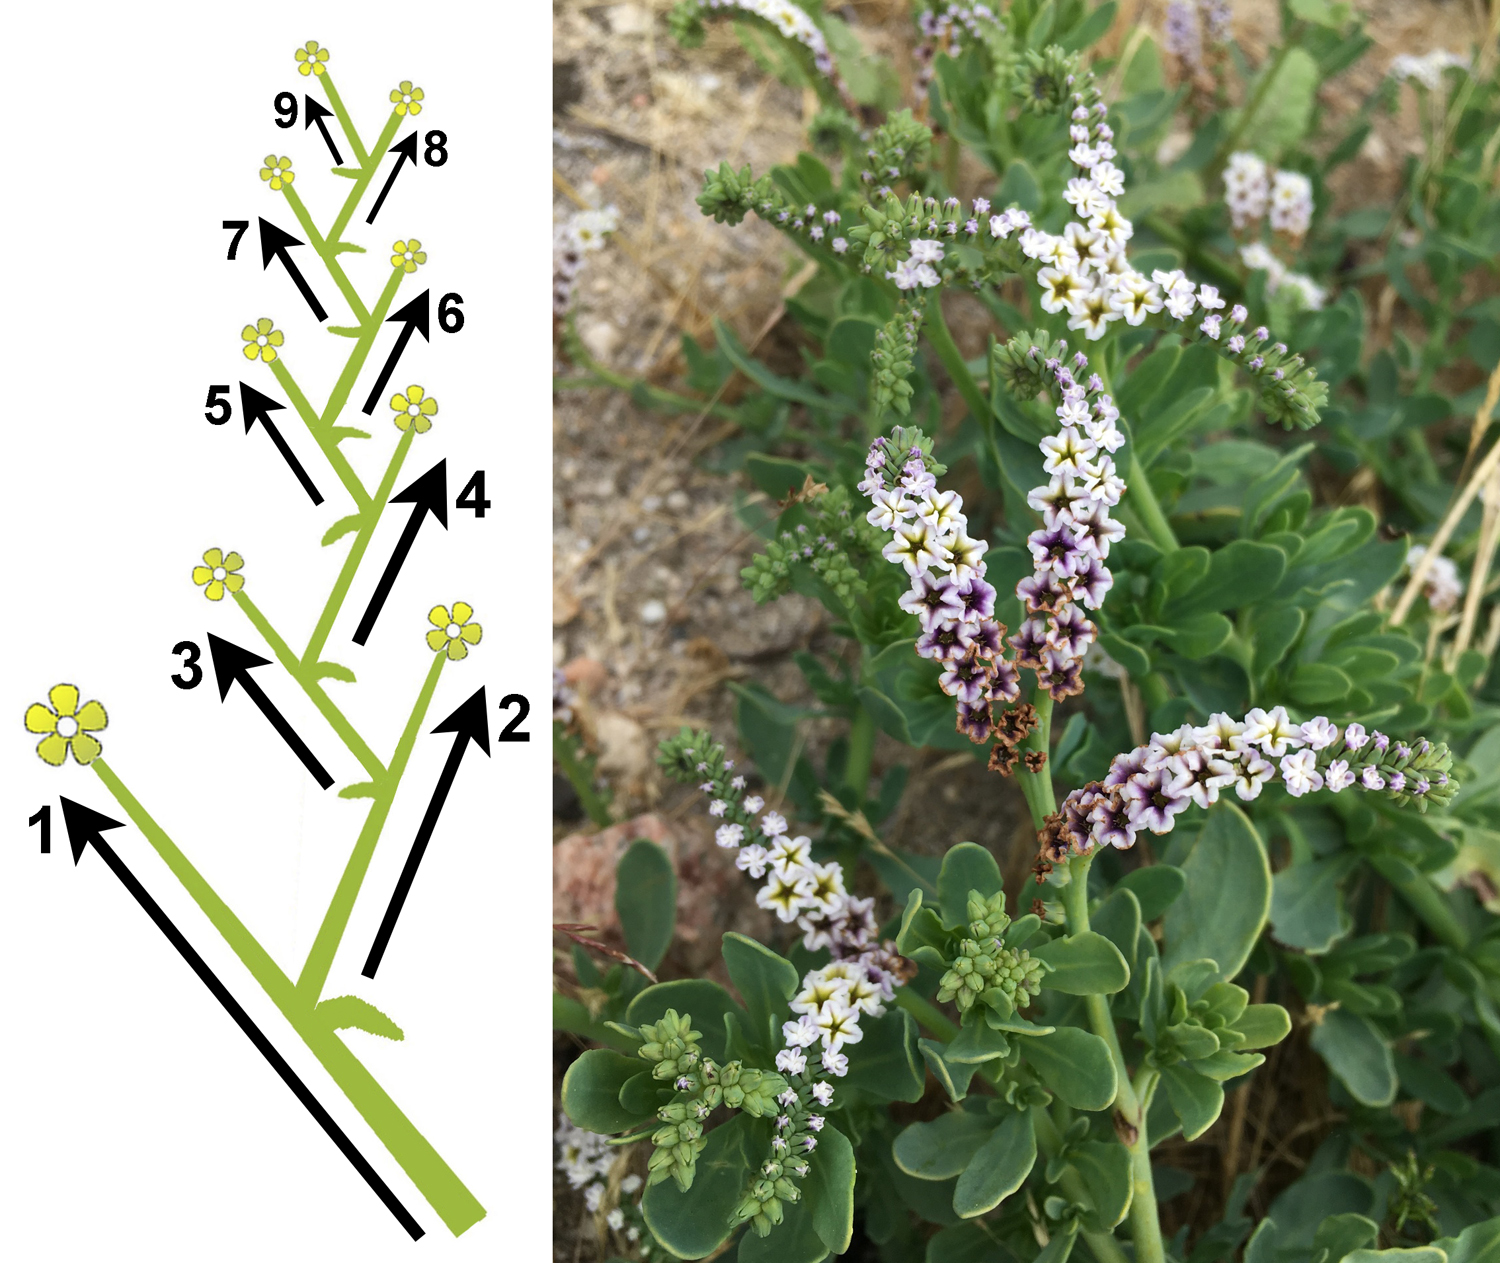 2-Panel figure of scorpioid cymes. Panel 1: Drawing of branching pattern, showing that lateral buds alternate to produce two rows of flowers. Panel 2: Scorpioid cymes of alkali heliotrope, each clearly showing two rows of flowers (photos).